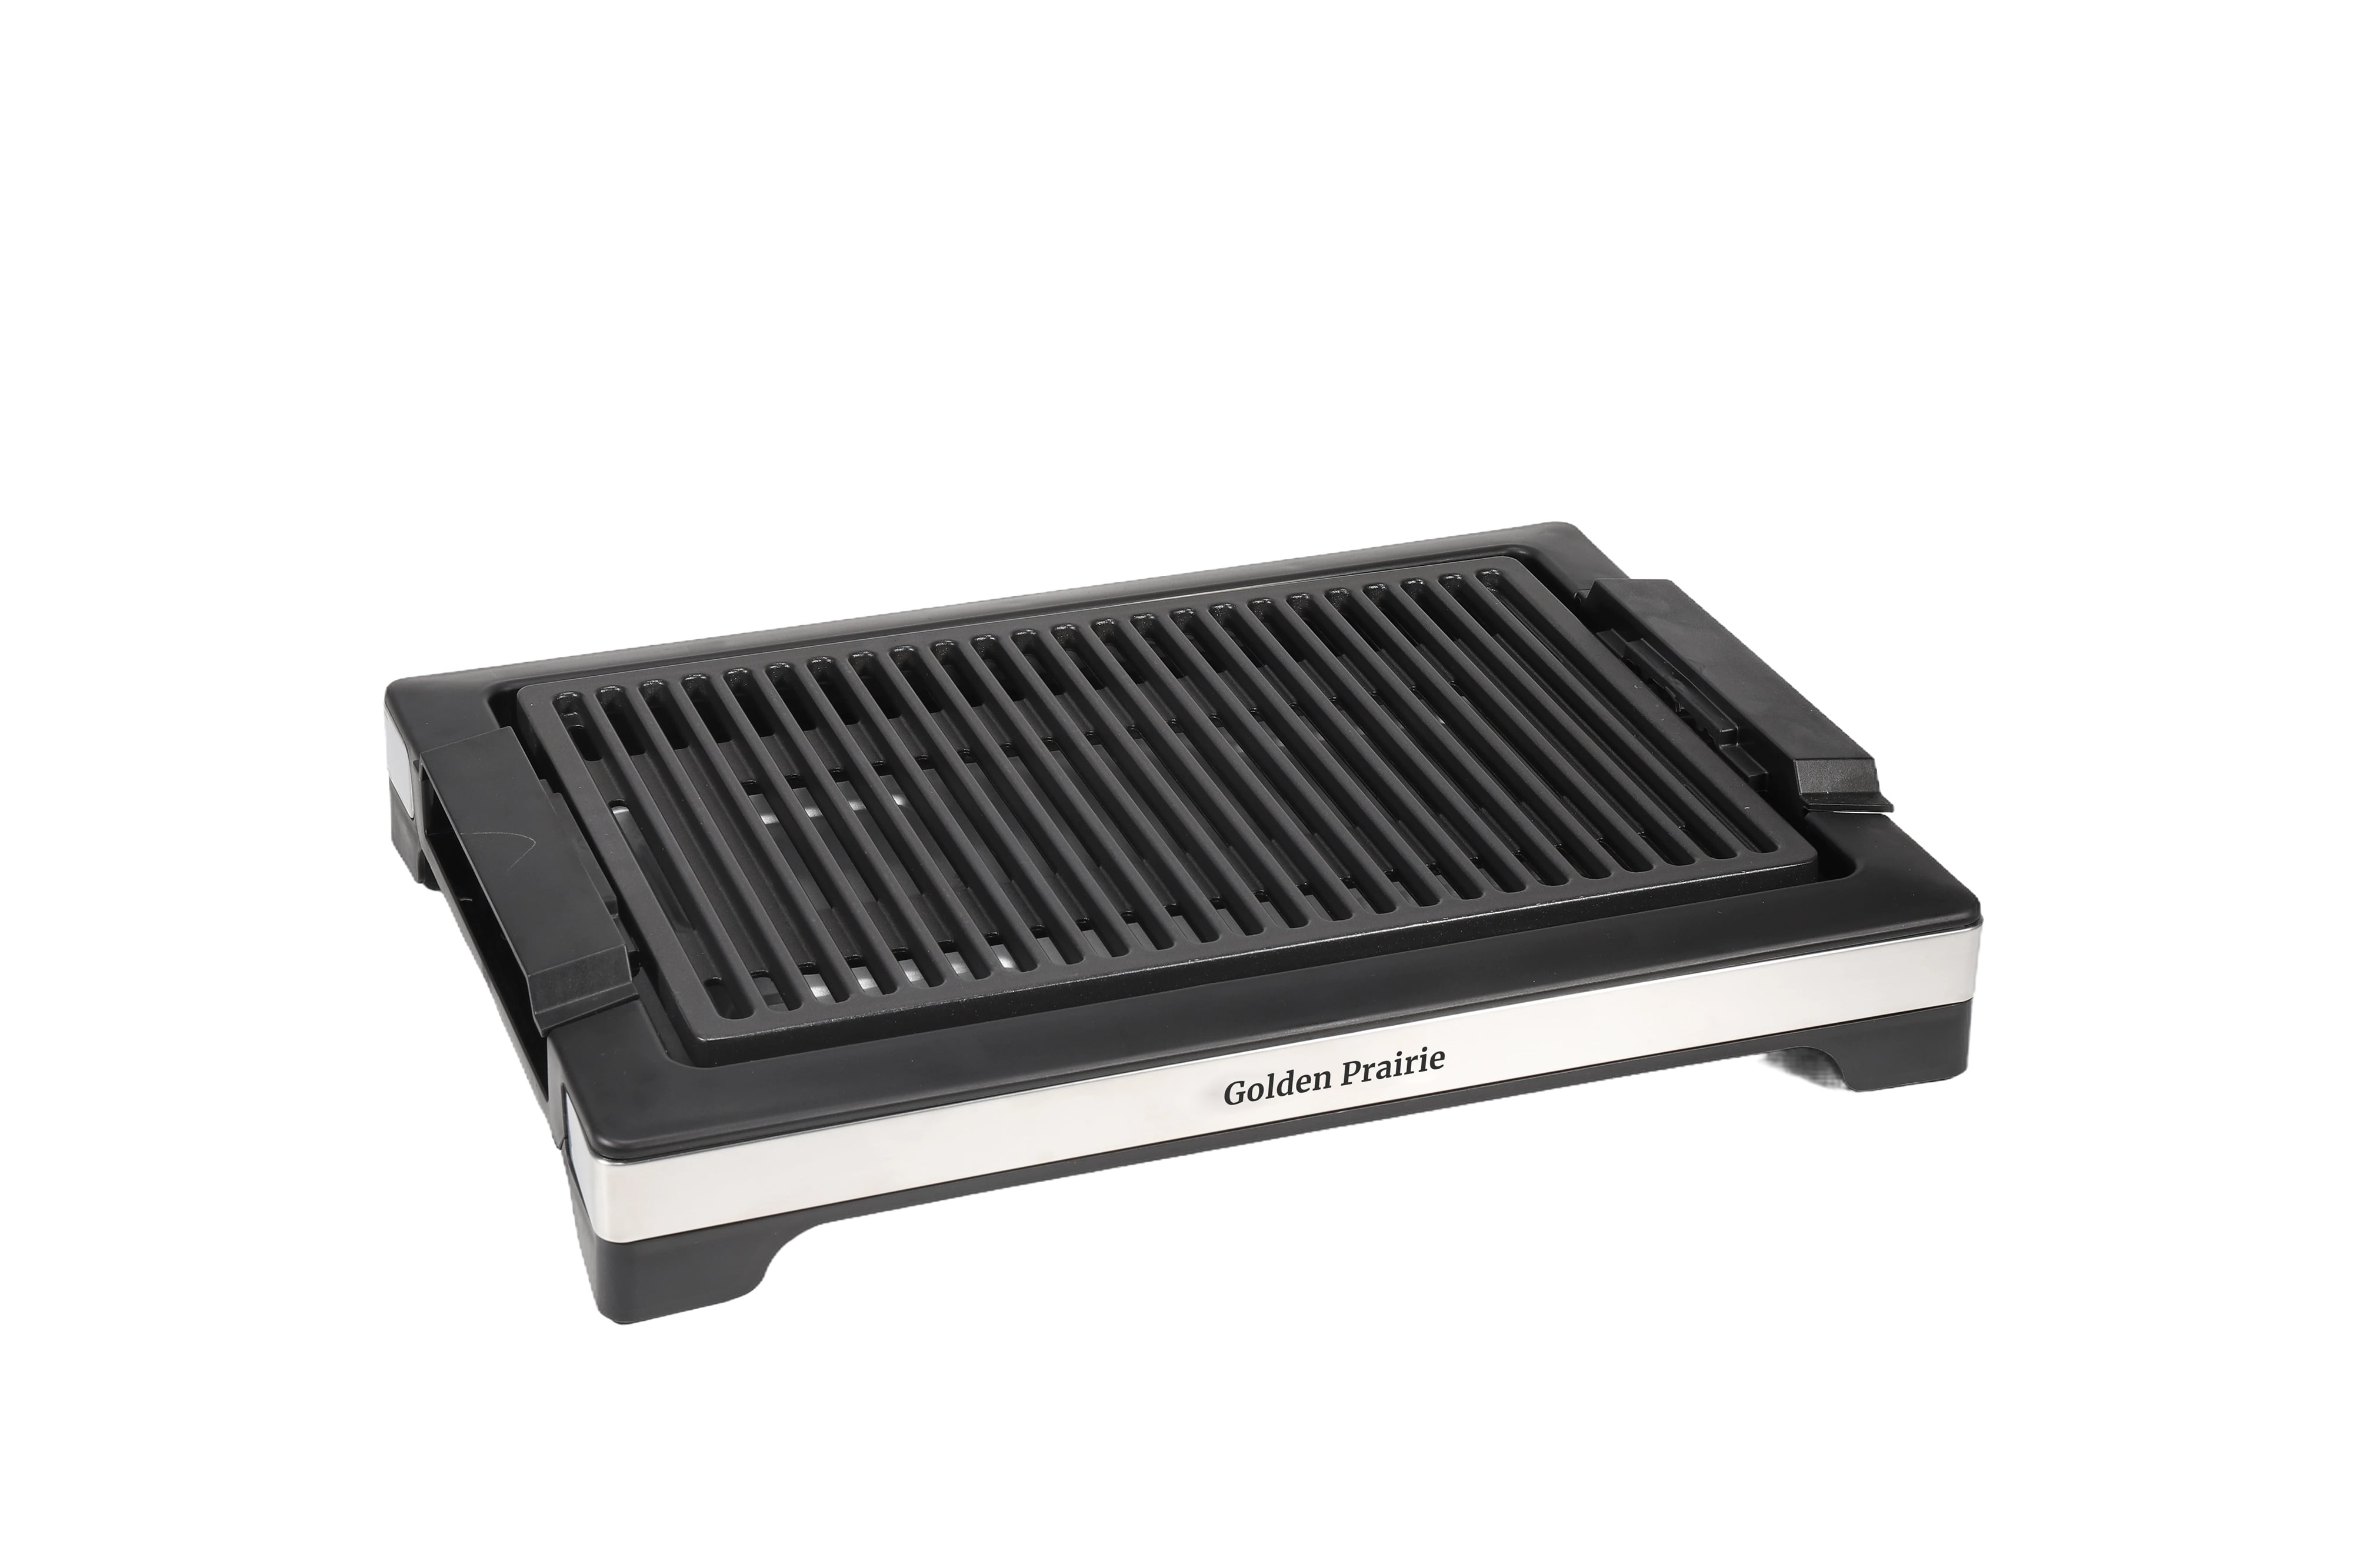 Barton 1600W Infrared Smokeless Electric Indoor Grill BBQ Grilling Adjustable